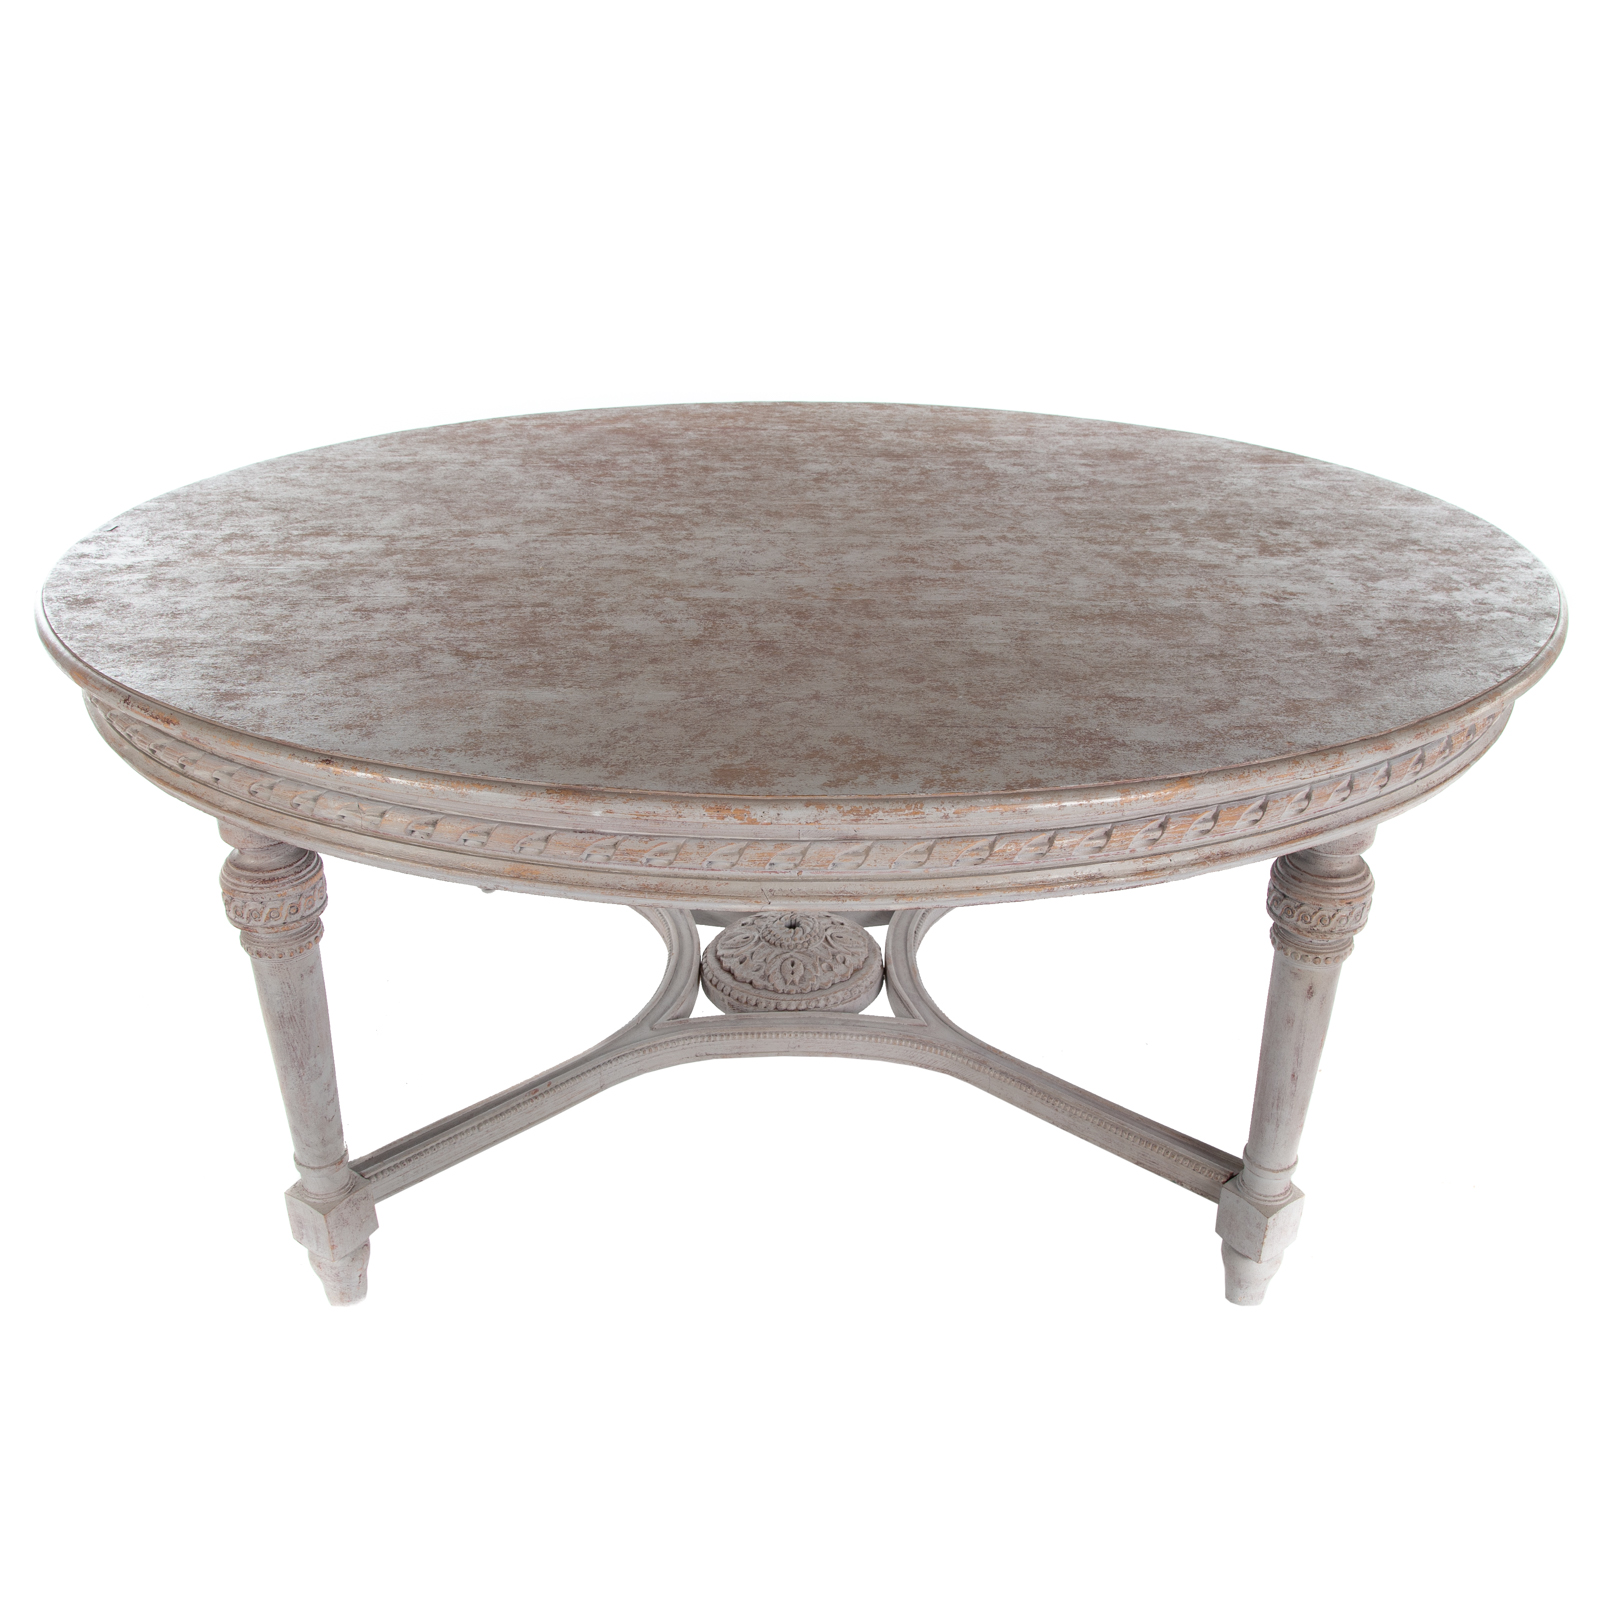 Louis XVI Style Oval Dining Table | Alex Cooper - Fine Art